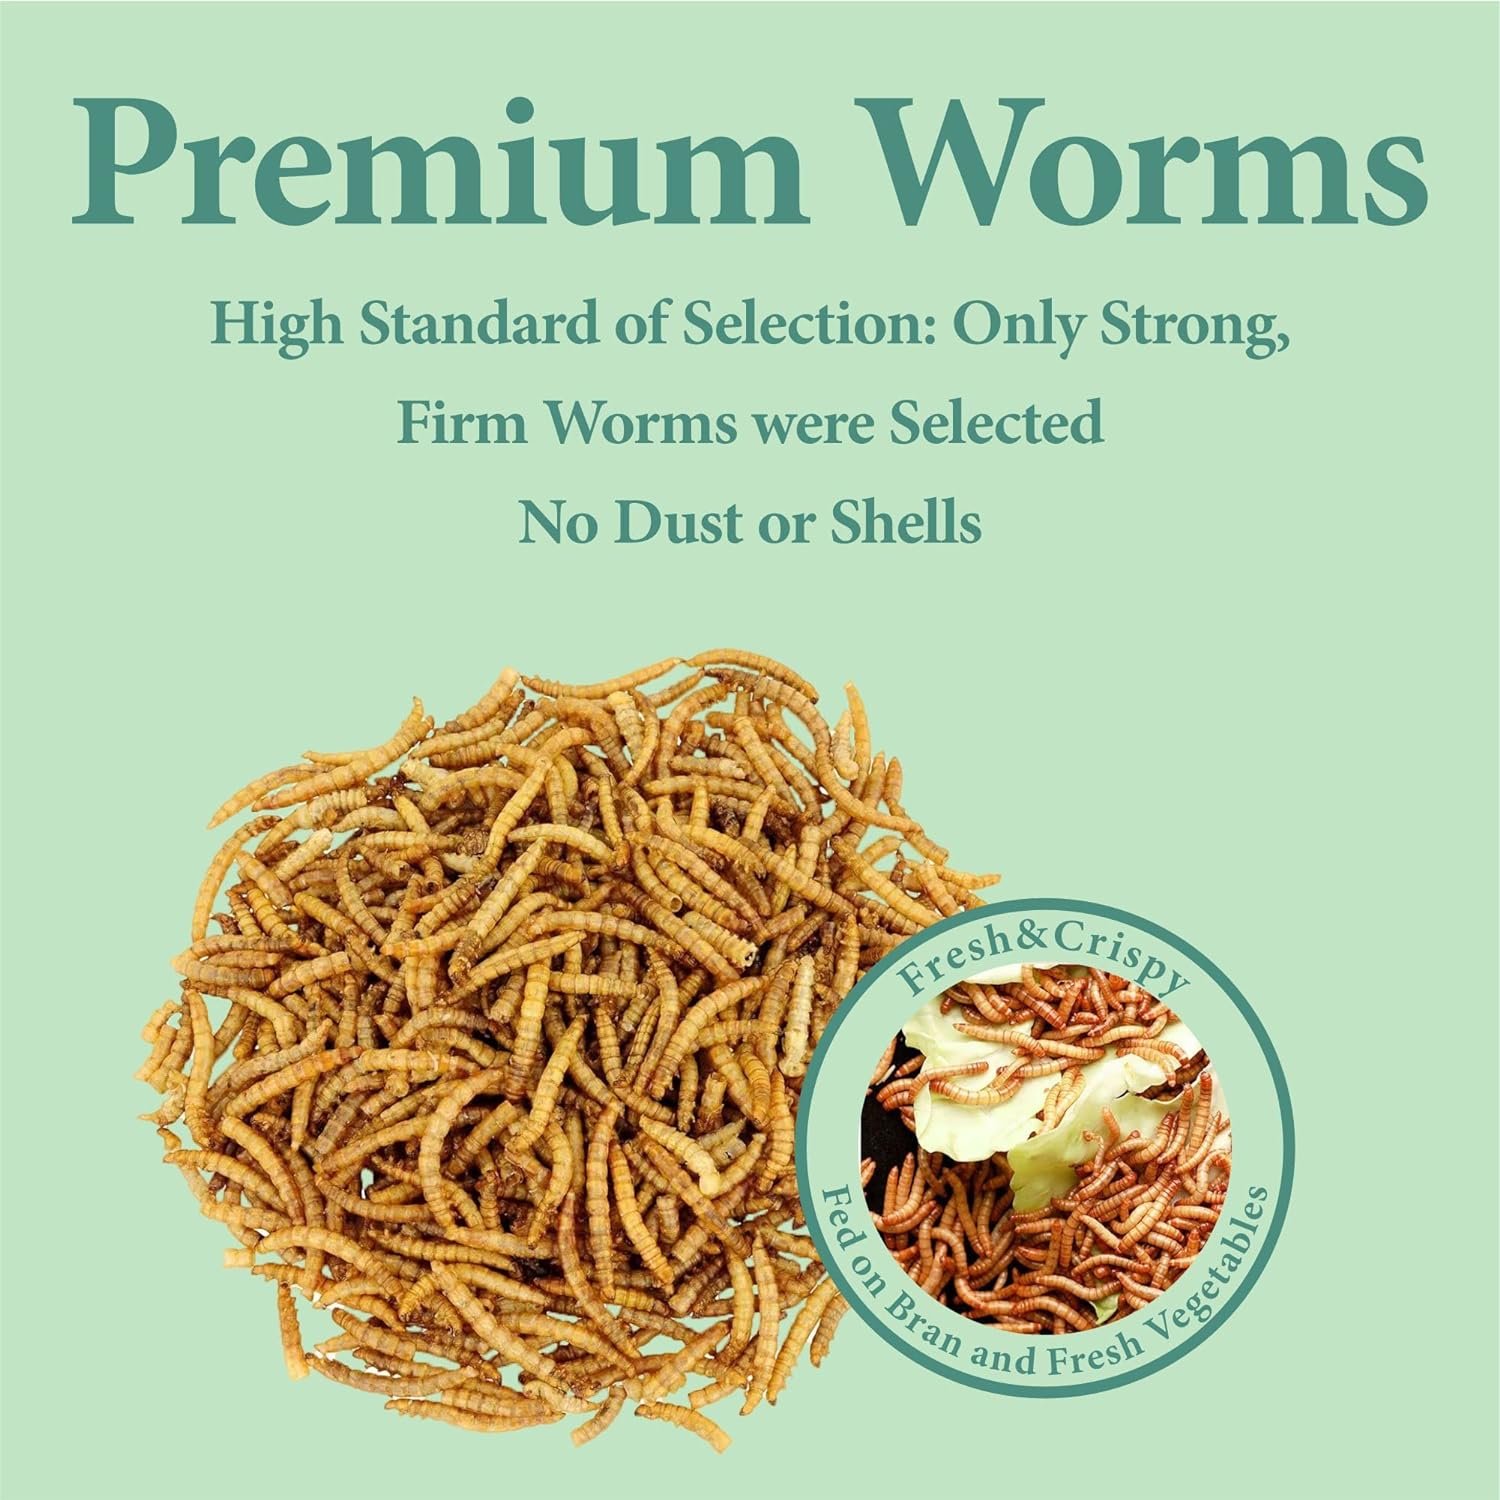 WORMSKING 10LB Dried Mealworms 100% Non GMO, High Protein Meal Worms for Chickens, Wild Birds, Hedgehogs, Hamsters, Reptiles, Great Chicken Food, Bird Food